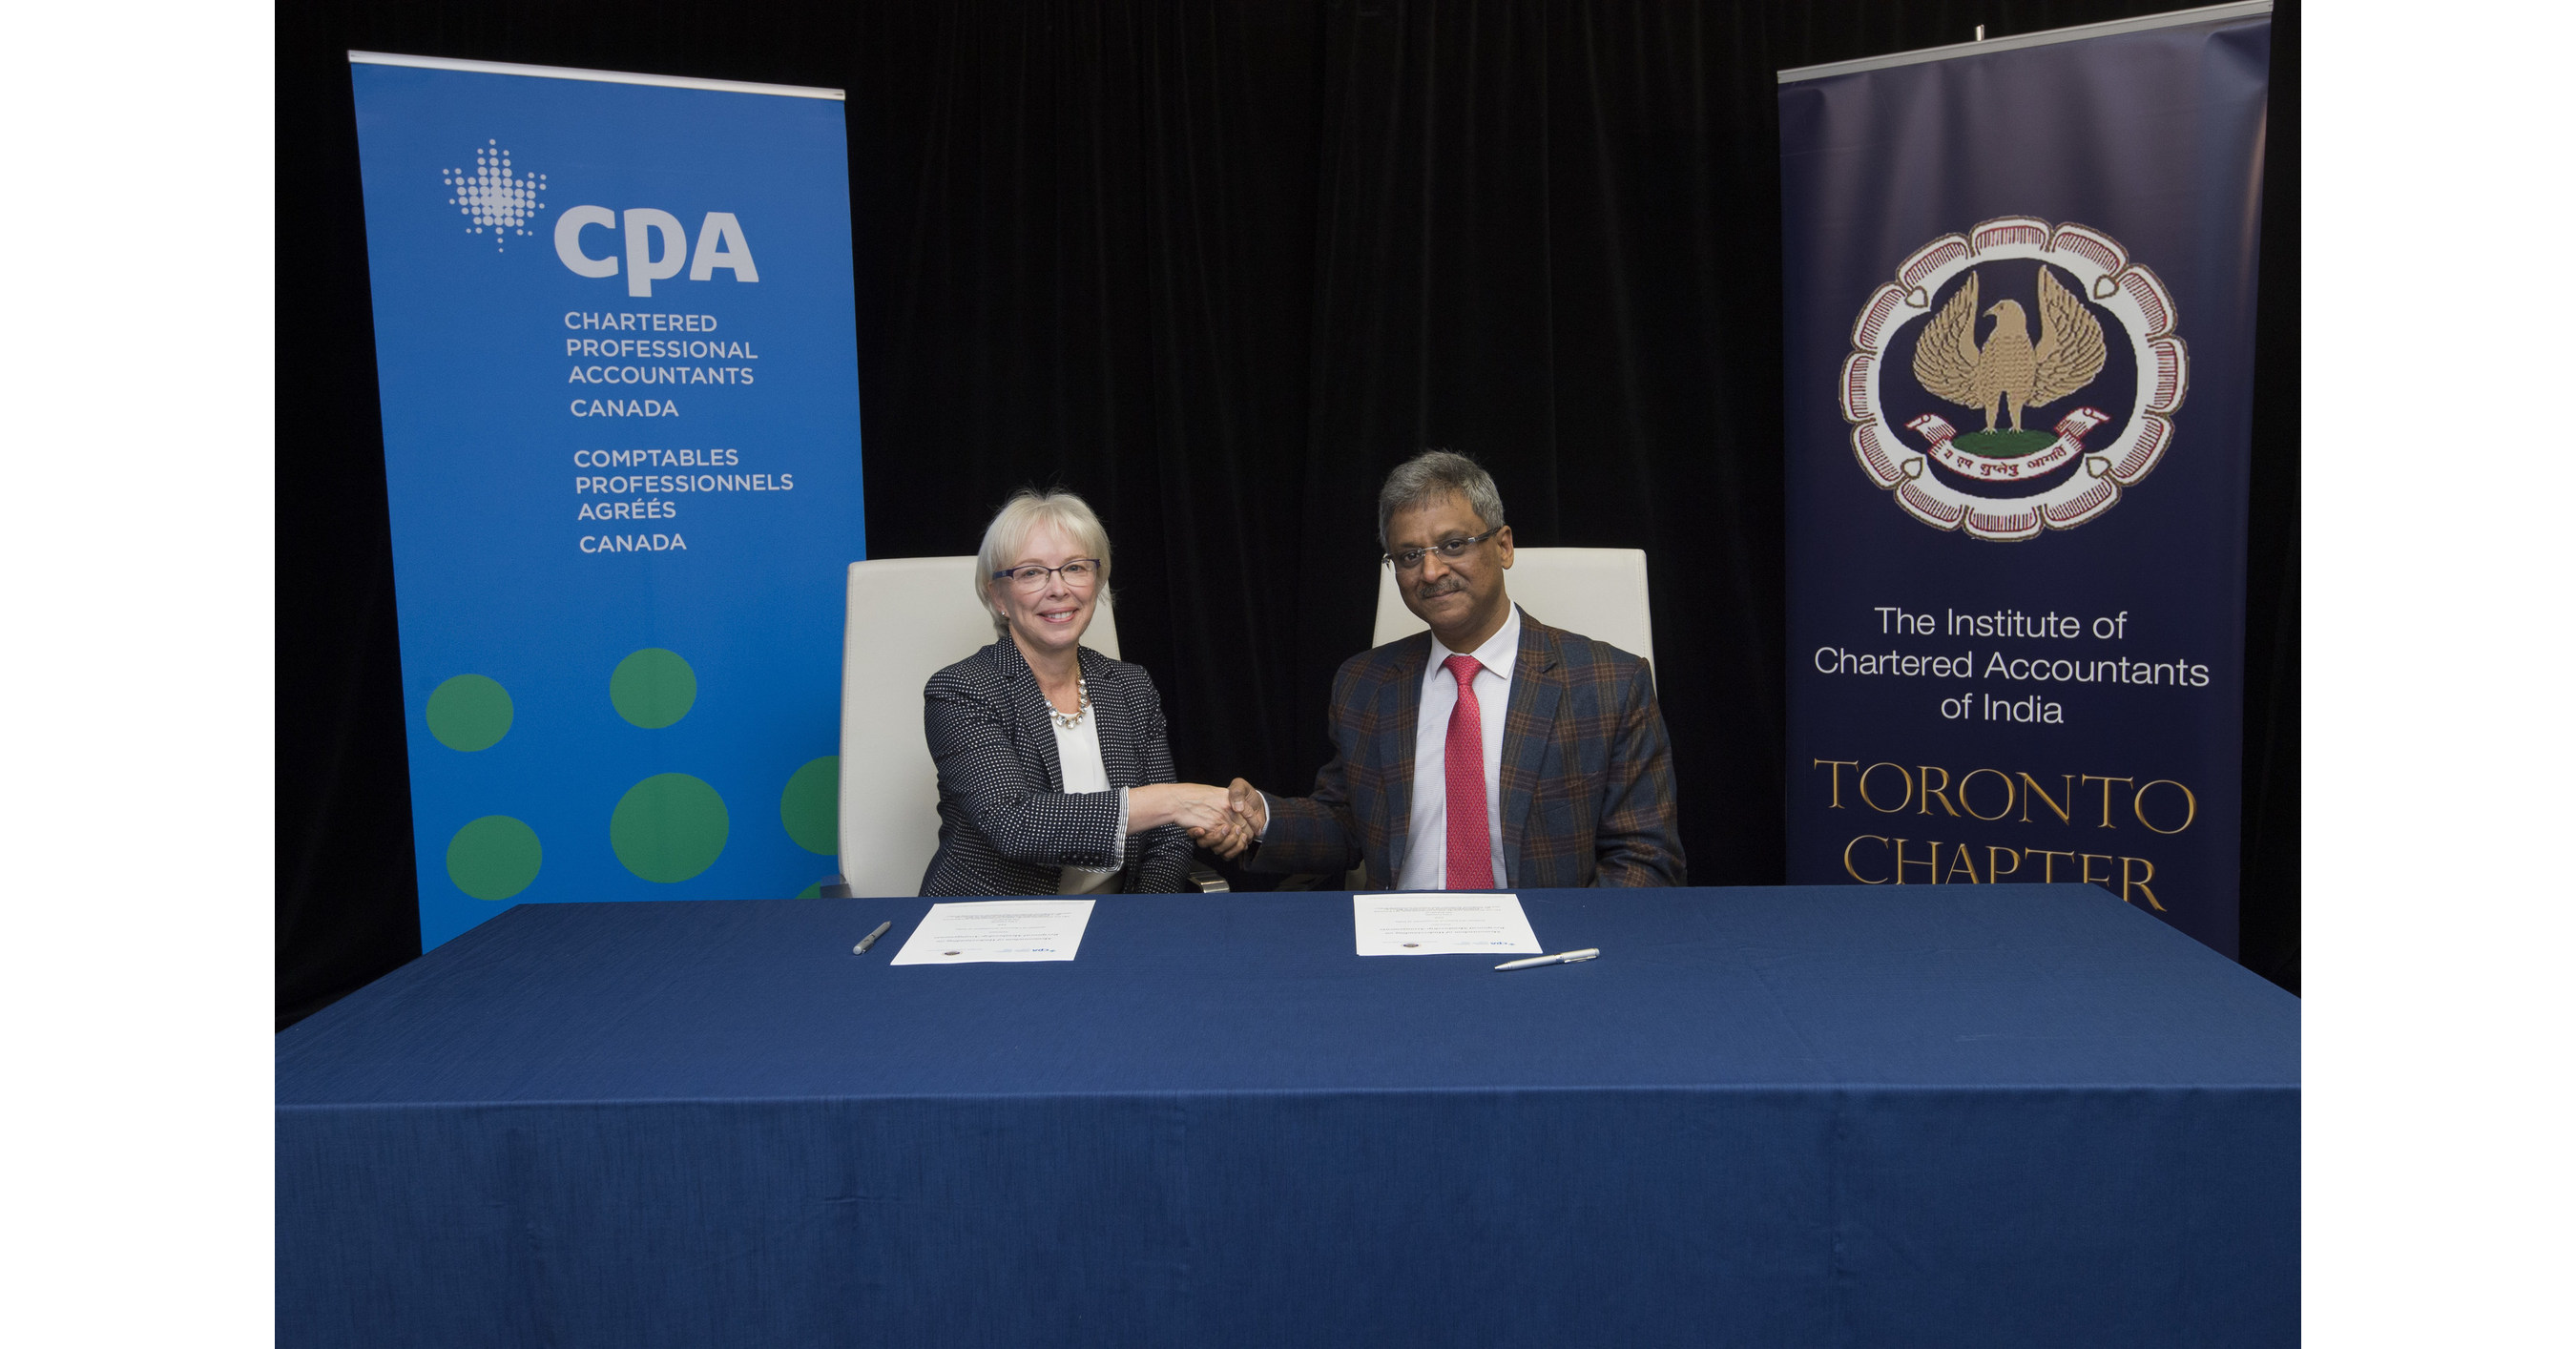 Canadian CPA bodies sign memorandum of understanding with the Institute of  Chartered Accountants of India